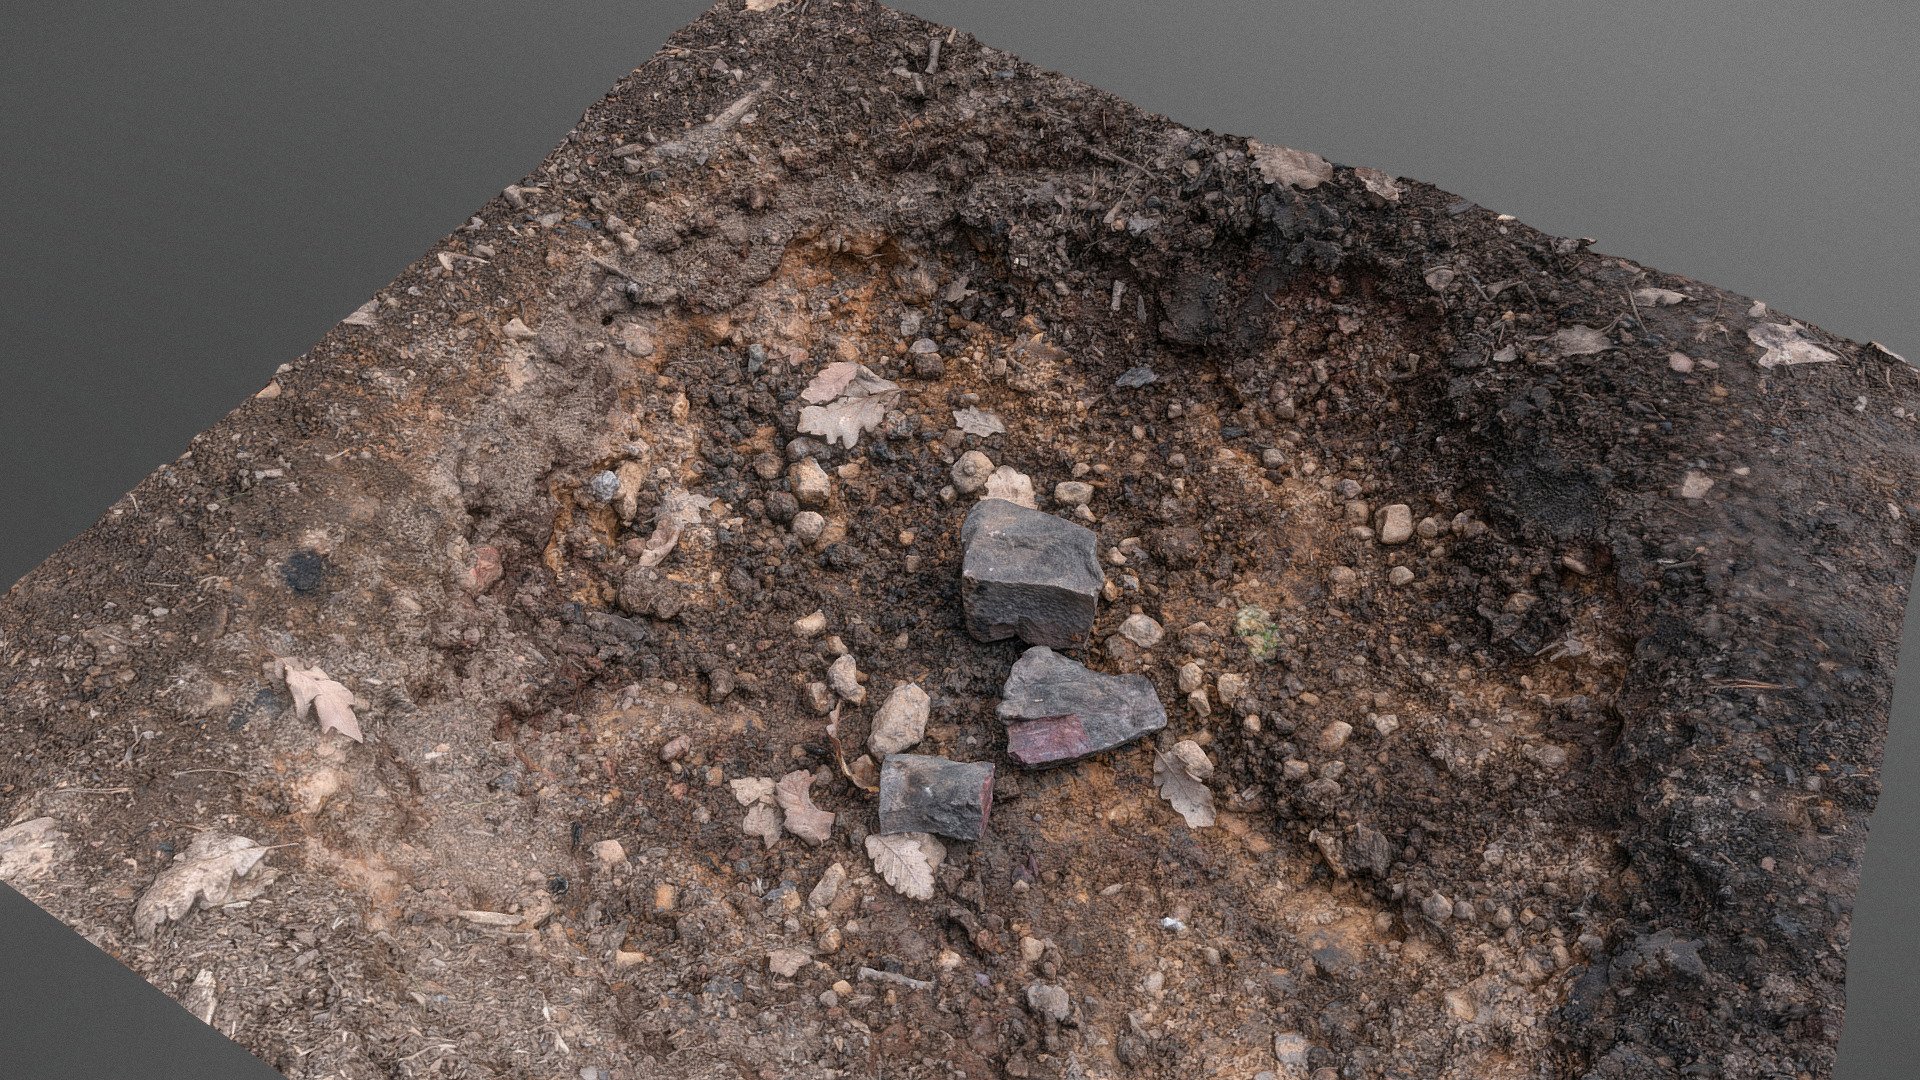 Firepit hole fireplace campfire dig in forest ground with some red stones

Photogrammetry scan 120x24MP, 4x8K texture + HD Normals - Firepit - Buy Royalty Free 3D model by matousekfoto 3d model